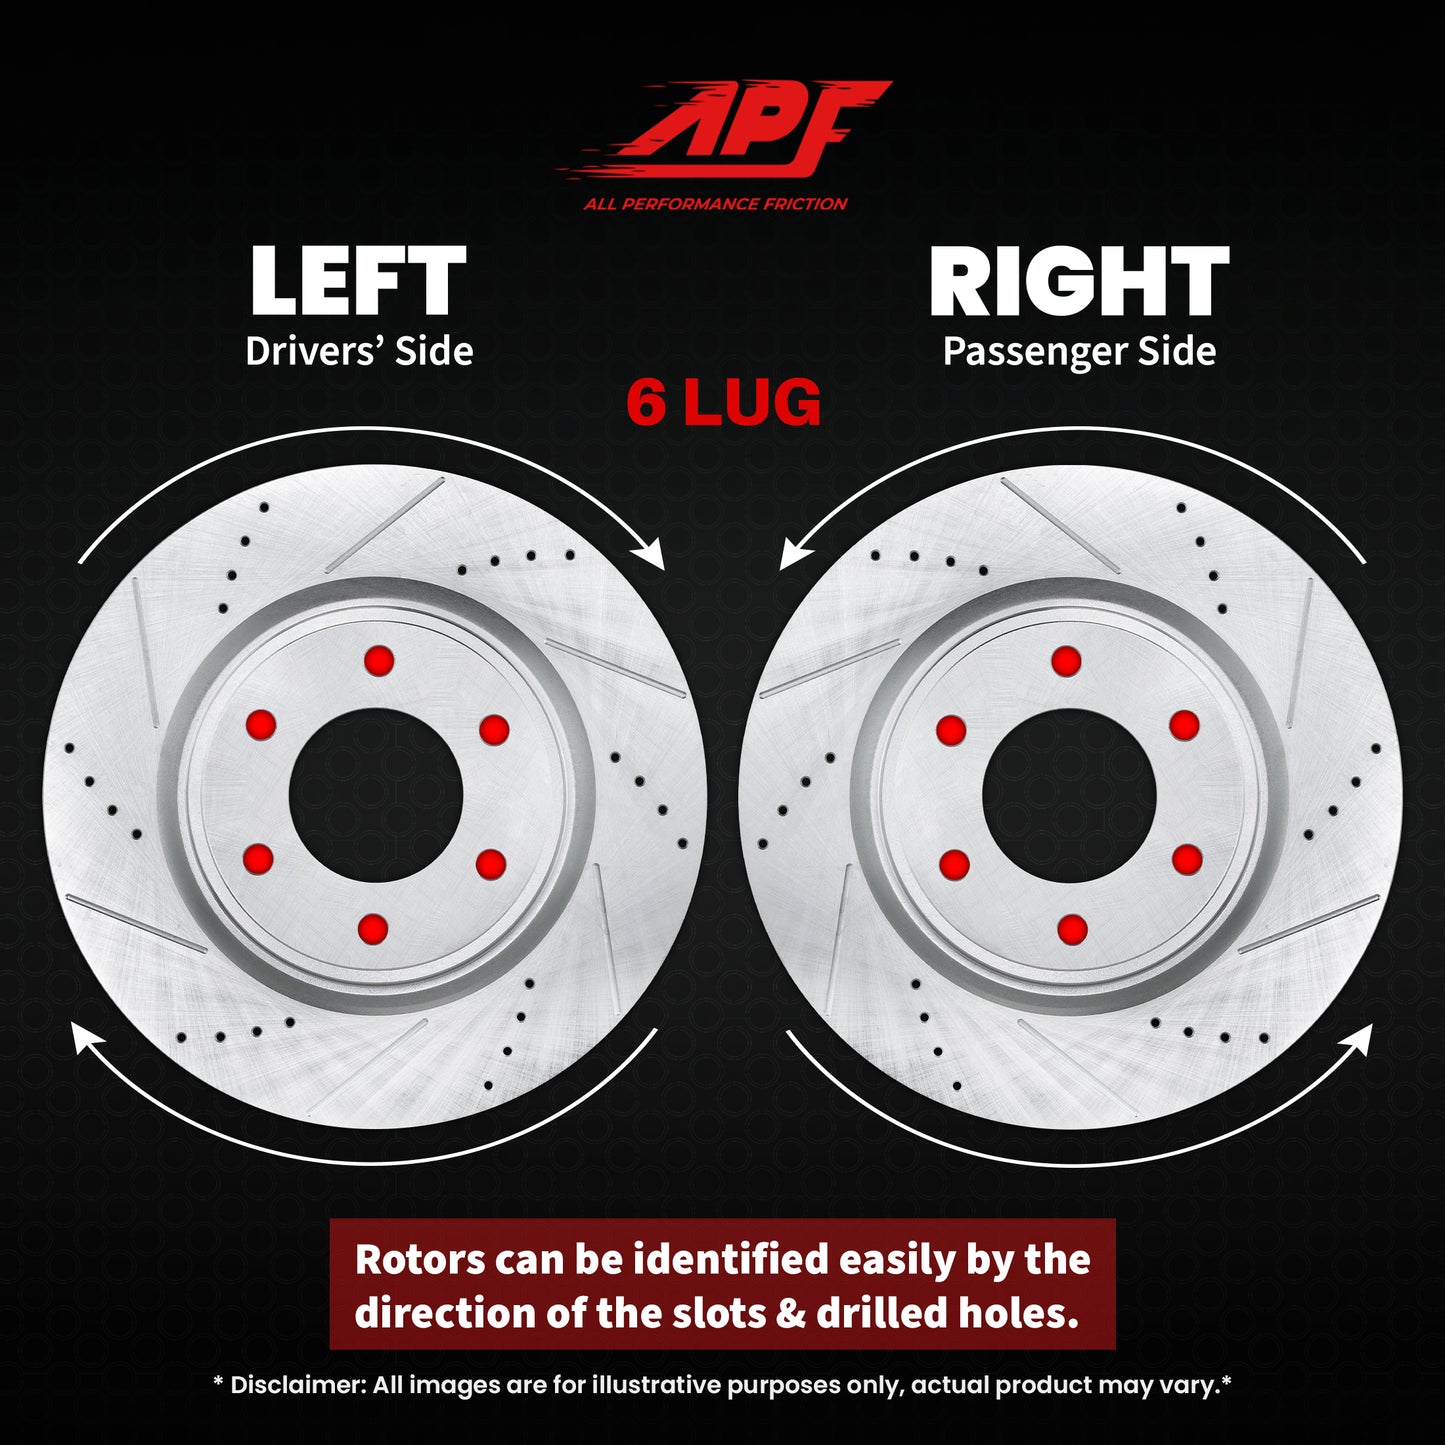 APF All Performance Friction Front Rotors compatible with GMC Yukon XL 1500 2000-2006 Zinc Drilled Slotted Rotors | $152.95